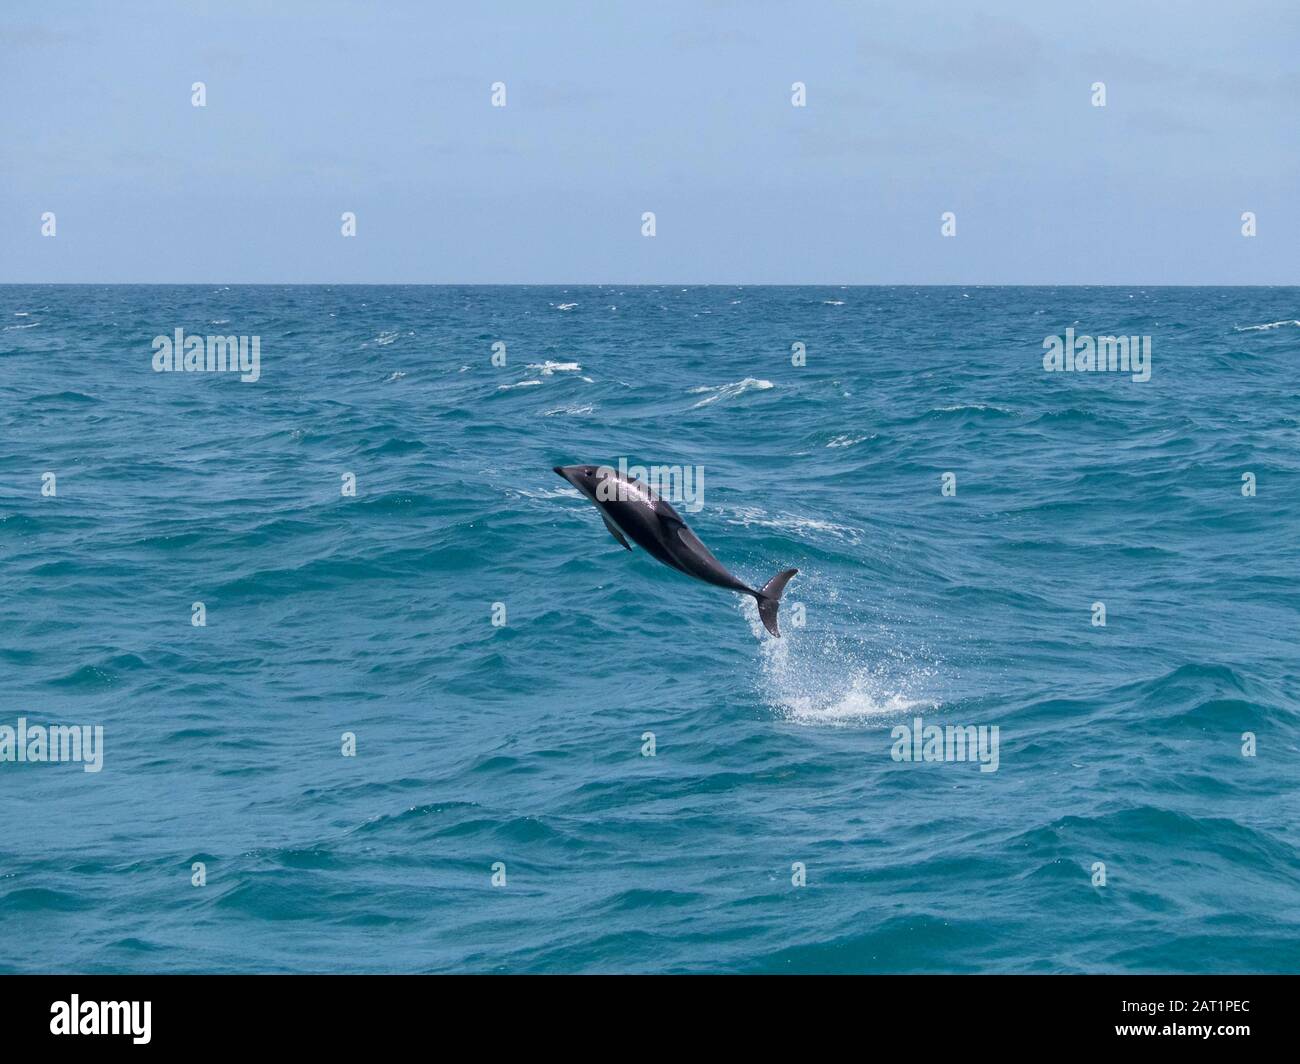 Dusky Dolphin (Lagenorhynchus obscurus) Leaping from the water off the coast of Kaikoura, New Zealand Stock Photo